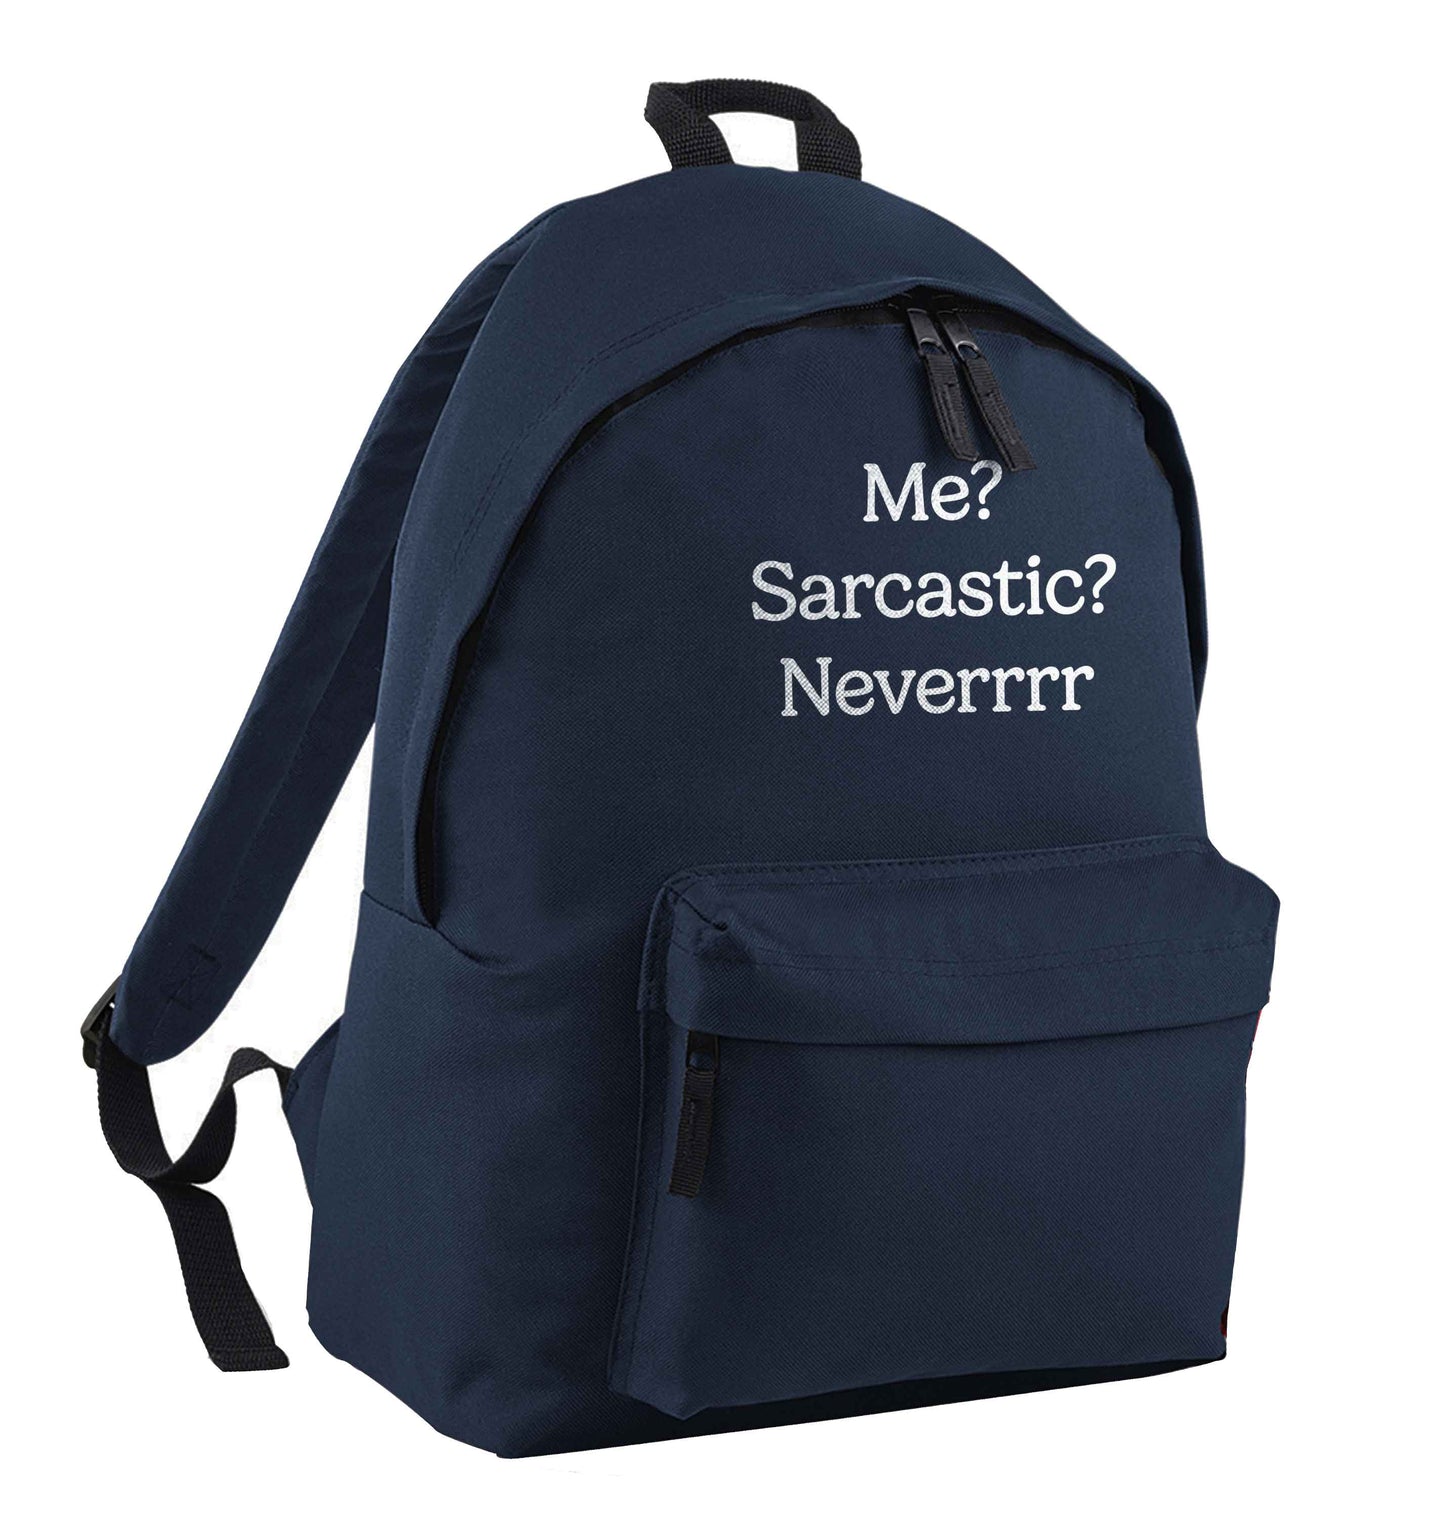 Me? sarcastic? never navy adults backpack